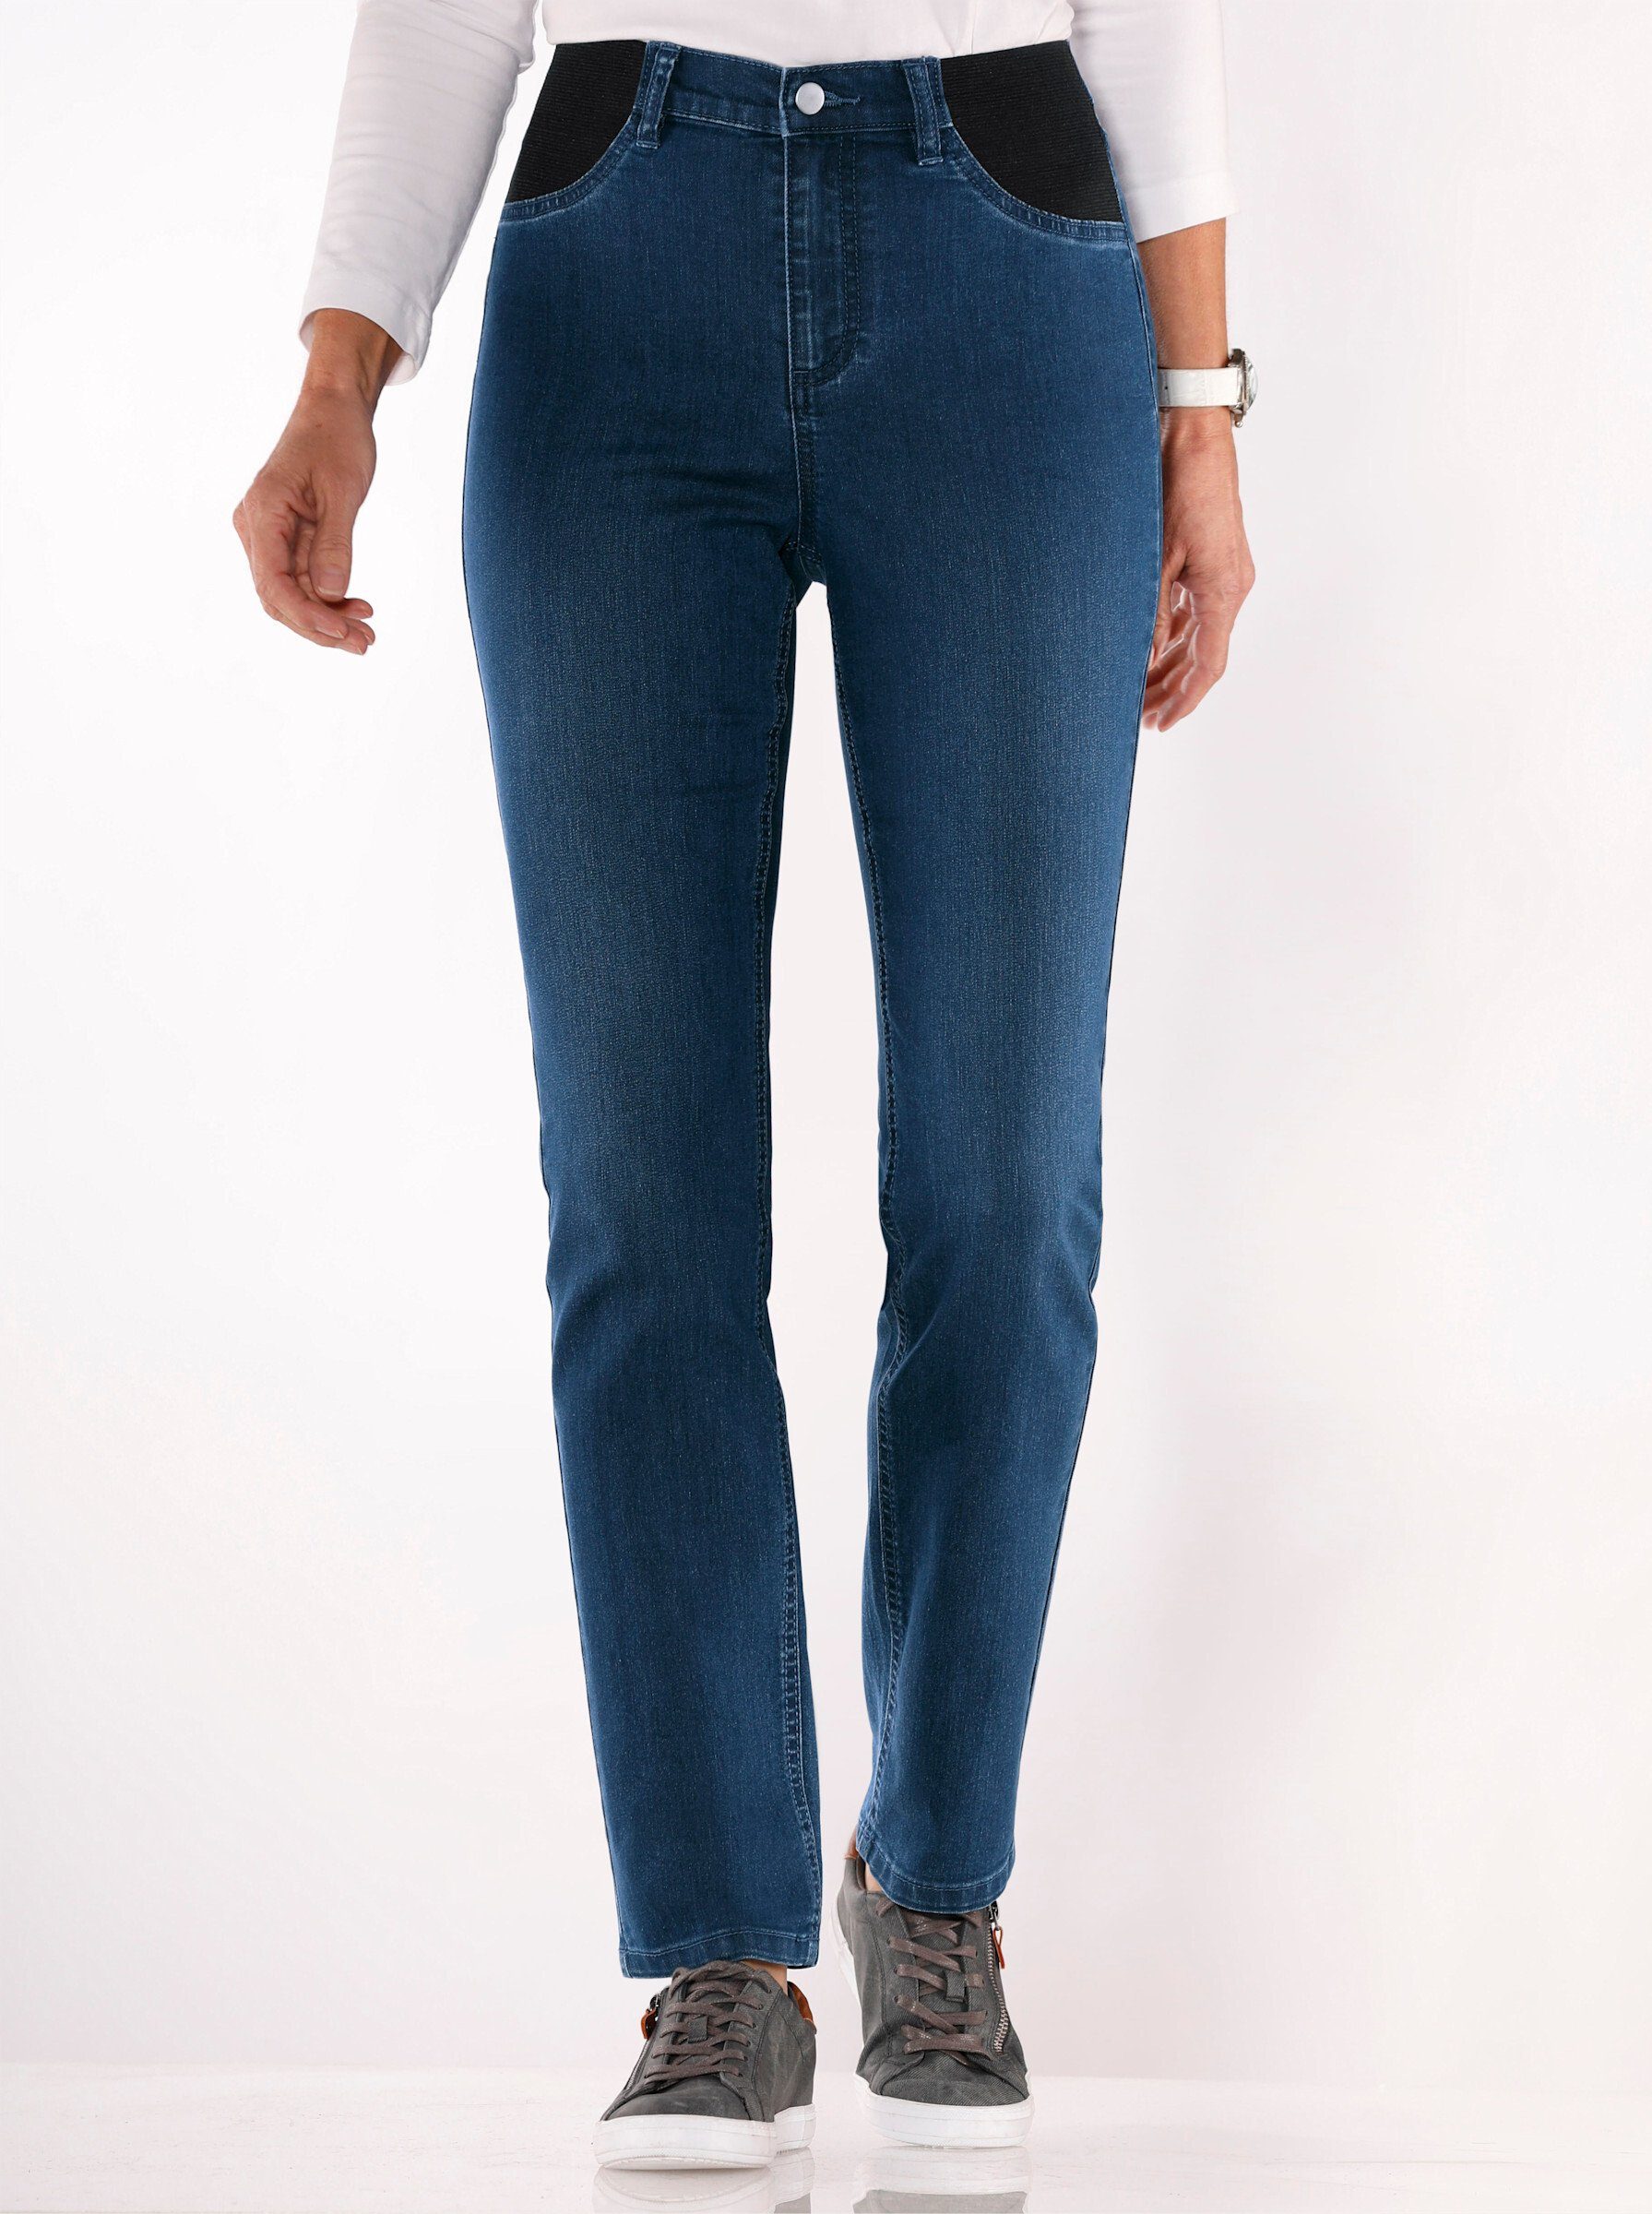 blue-stone-washed Bequeme Jeans an! Sieh